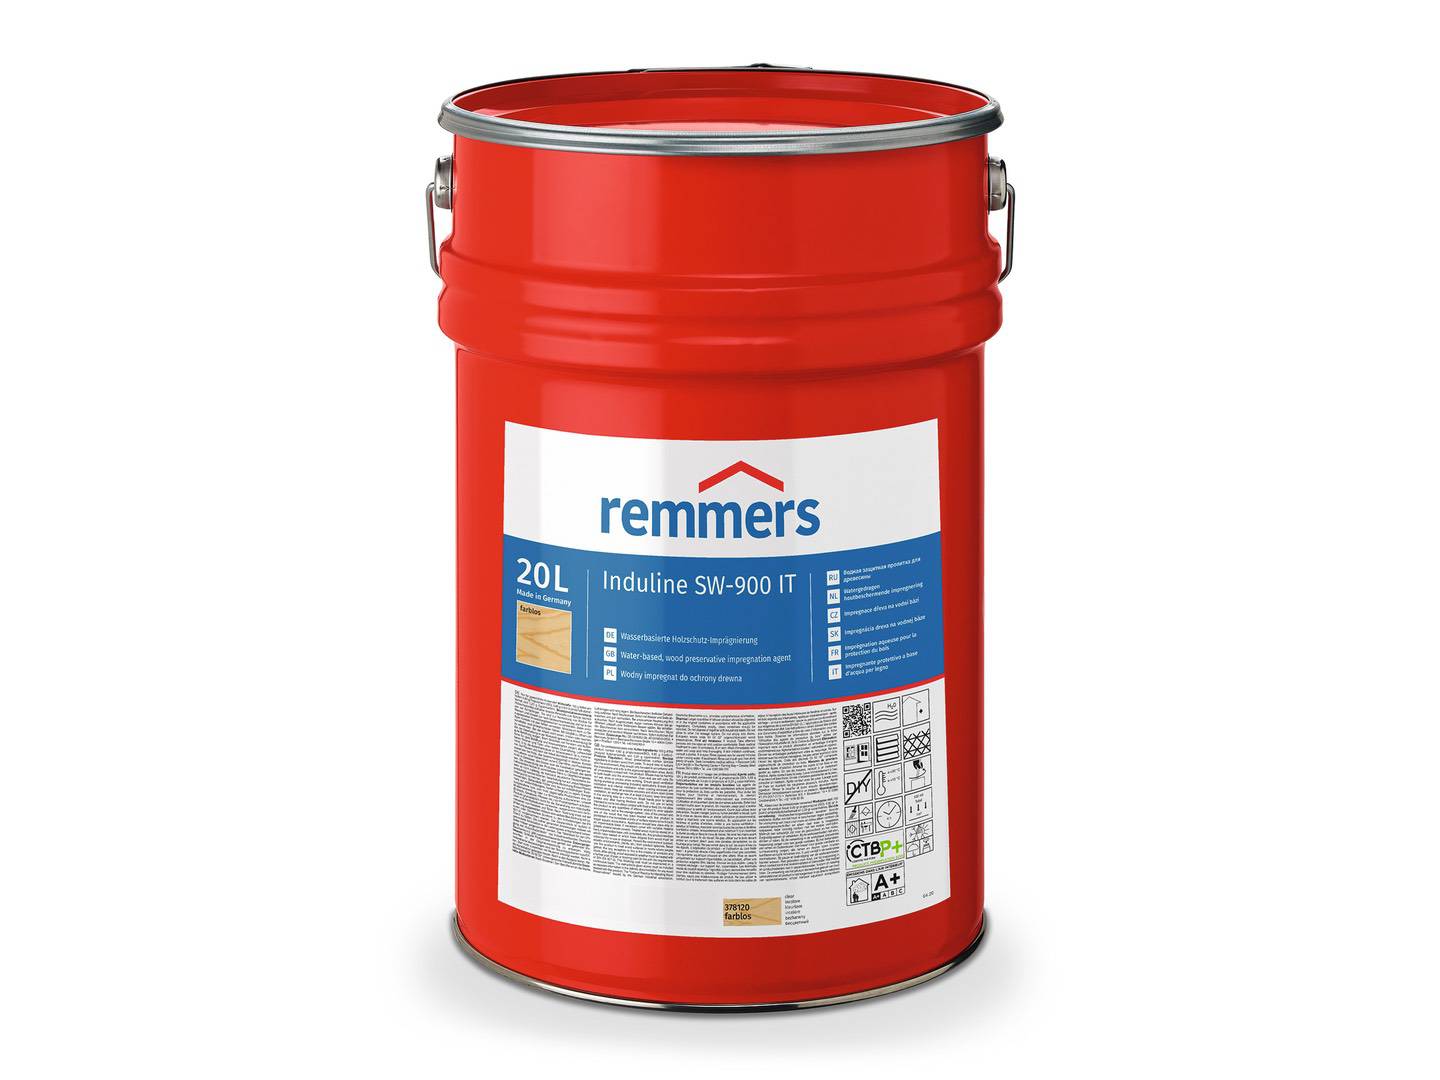 REMMERS Induline SW-900 IT